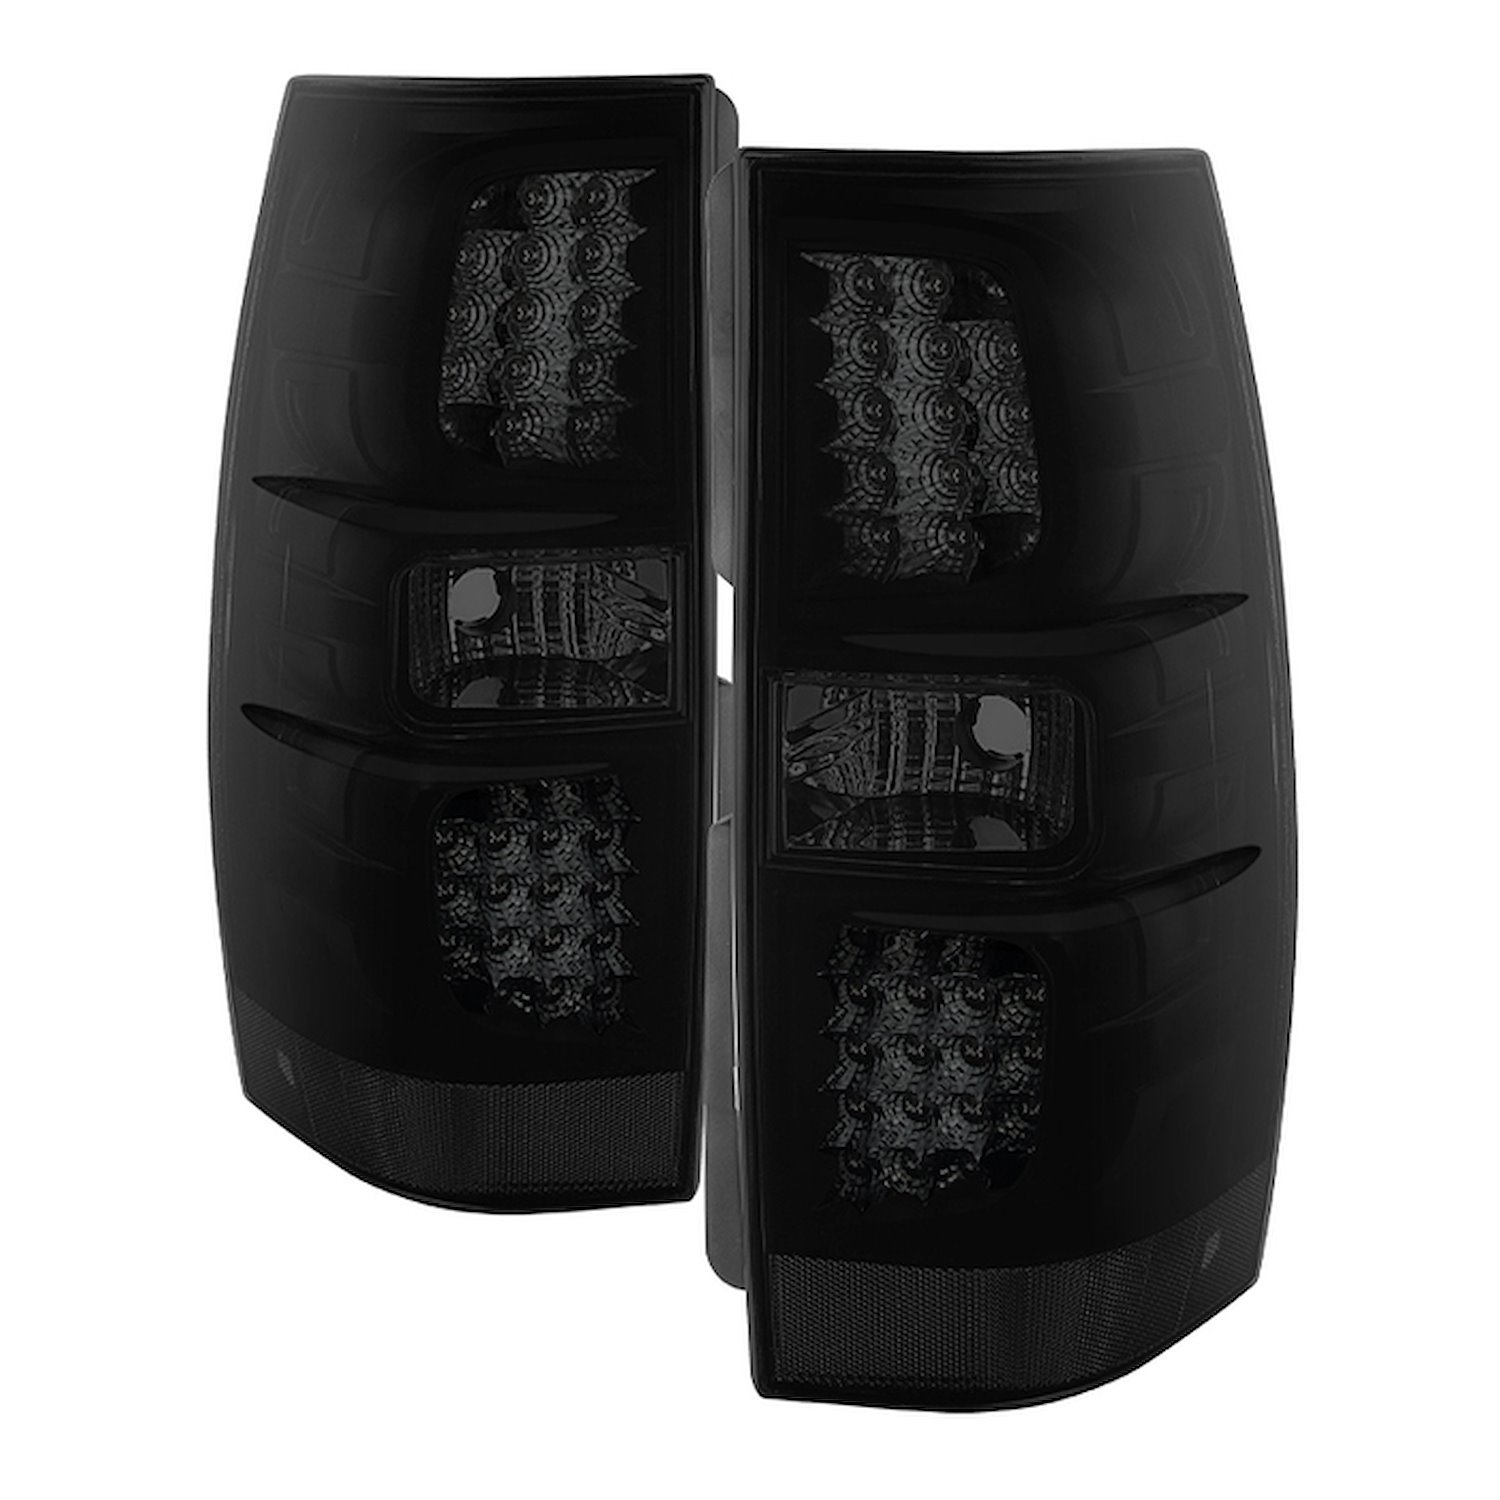 xTune LED Tail Lights 2007-2014 Chevy Suburban/Tahoe